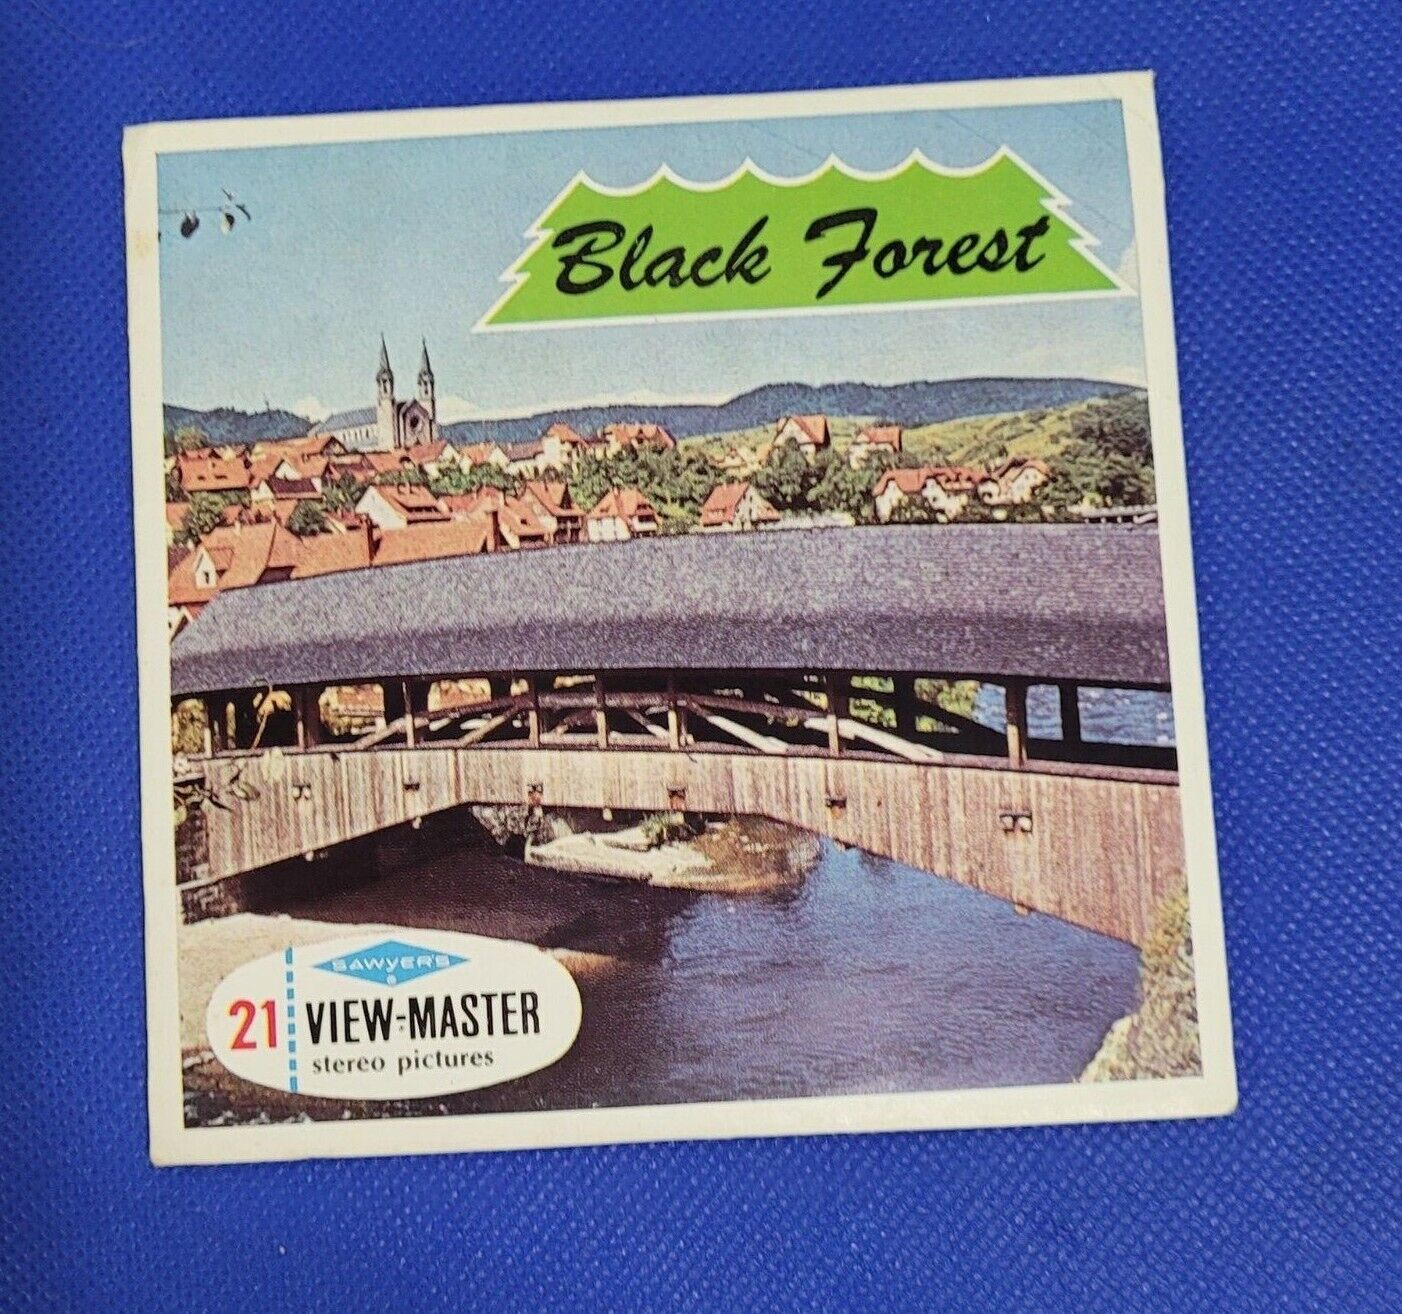 Sawyer's Vintage C410 E Black Forest Germany view-master 3 Reels Packet